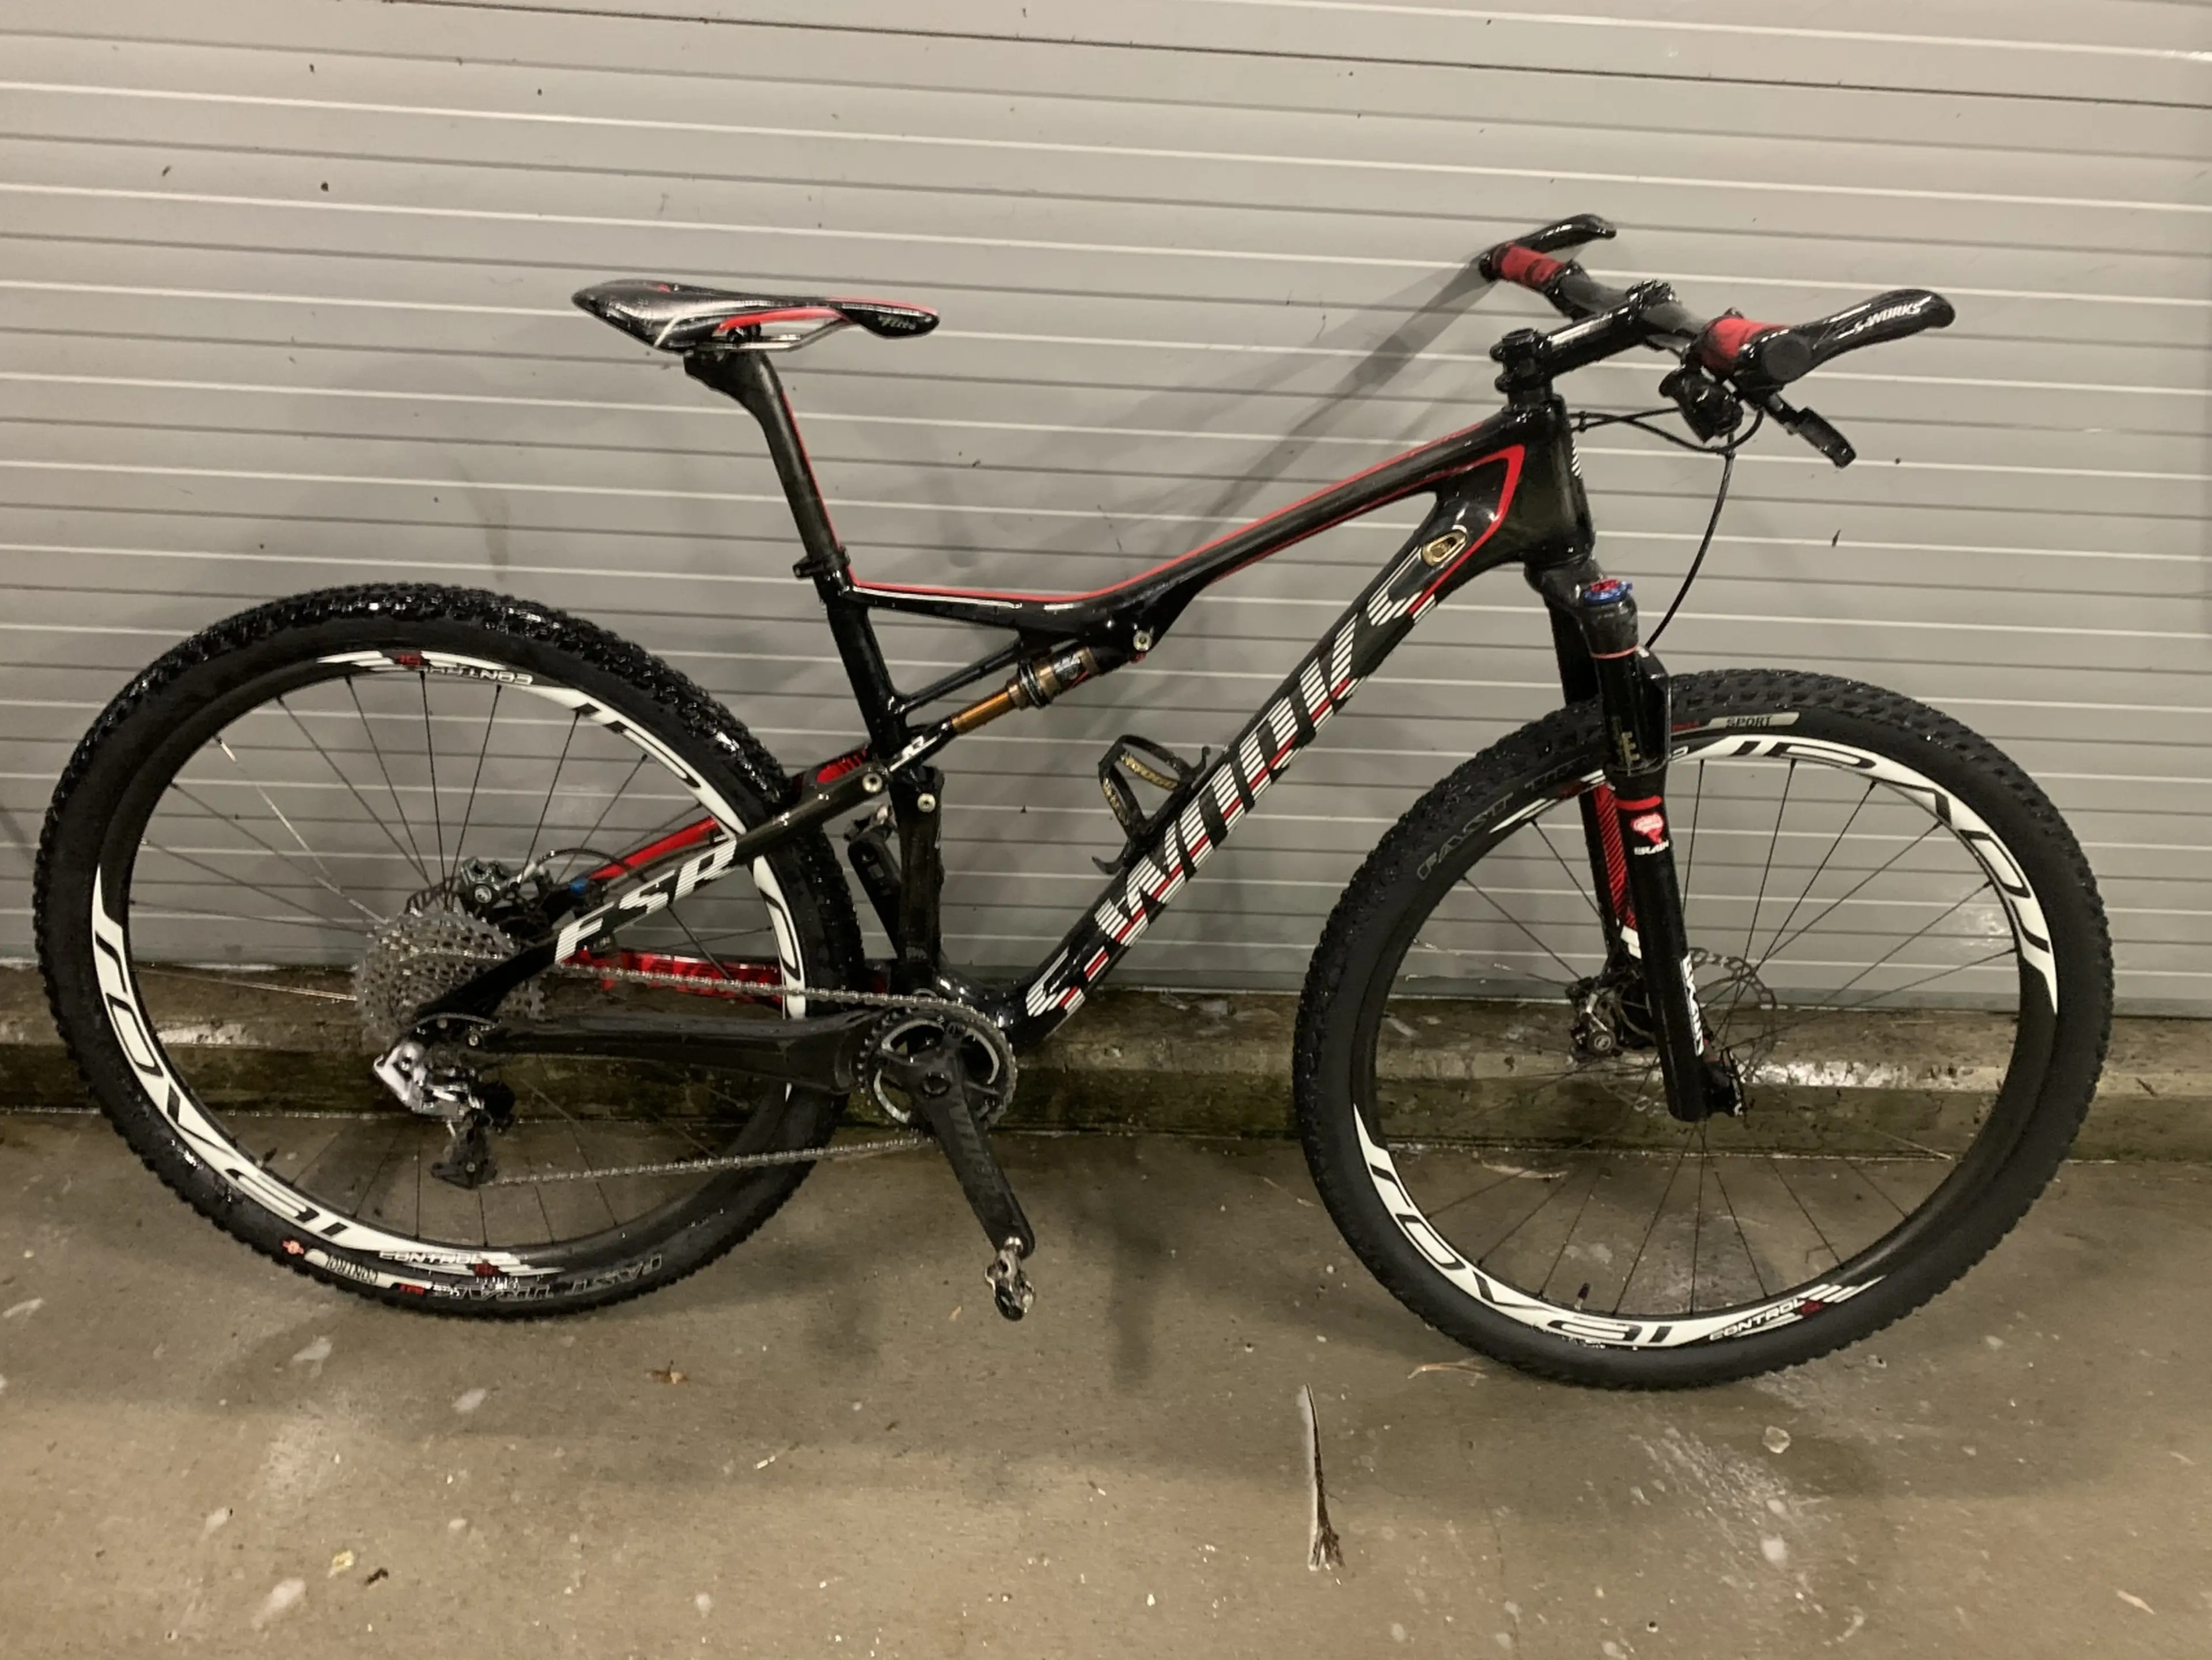 1. Vând Specialized S-Works Epic World Cup